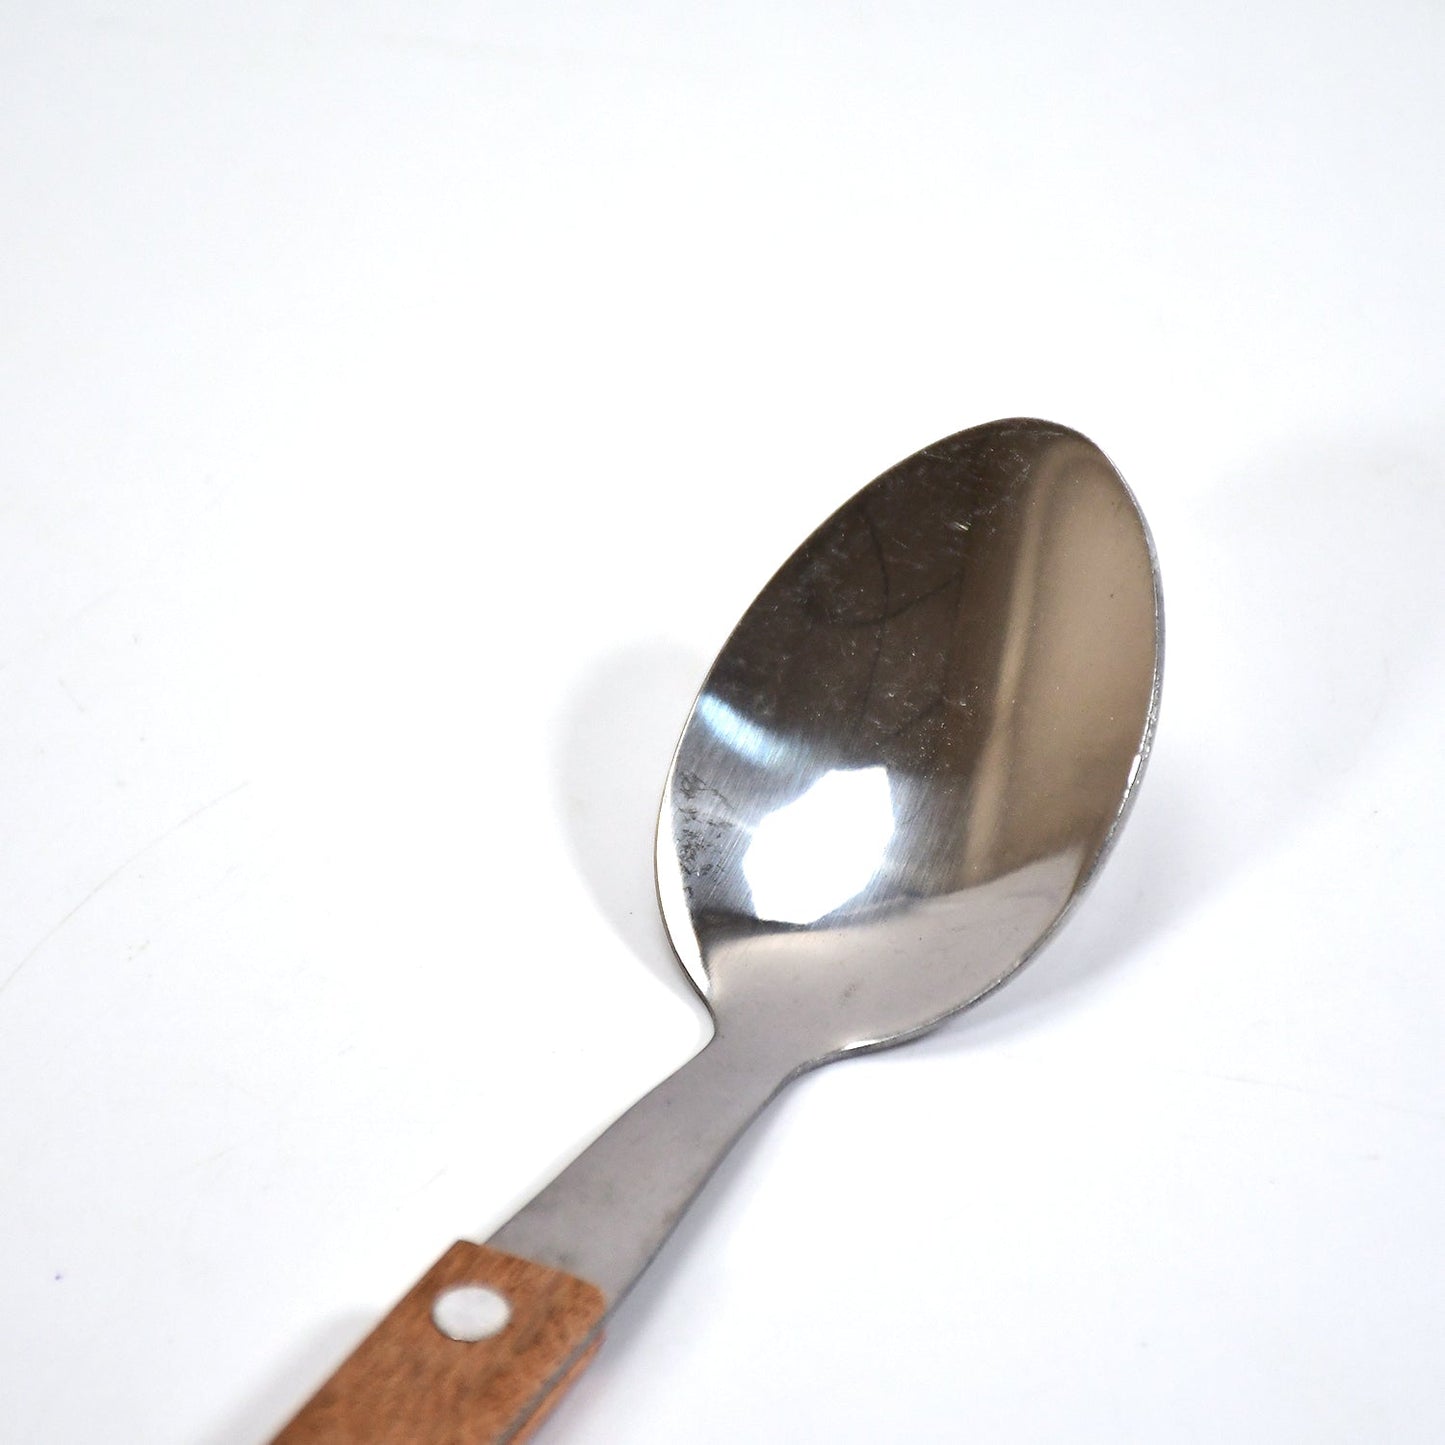 2709 STAINLESS STEEL WITH WOODEN HANDLE 1PC SPOON. SPOON FOR COFFEE, TEA, SUGAR, & SPICES. DukanDaily